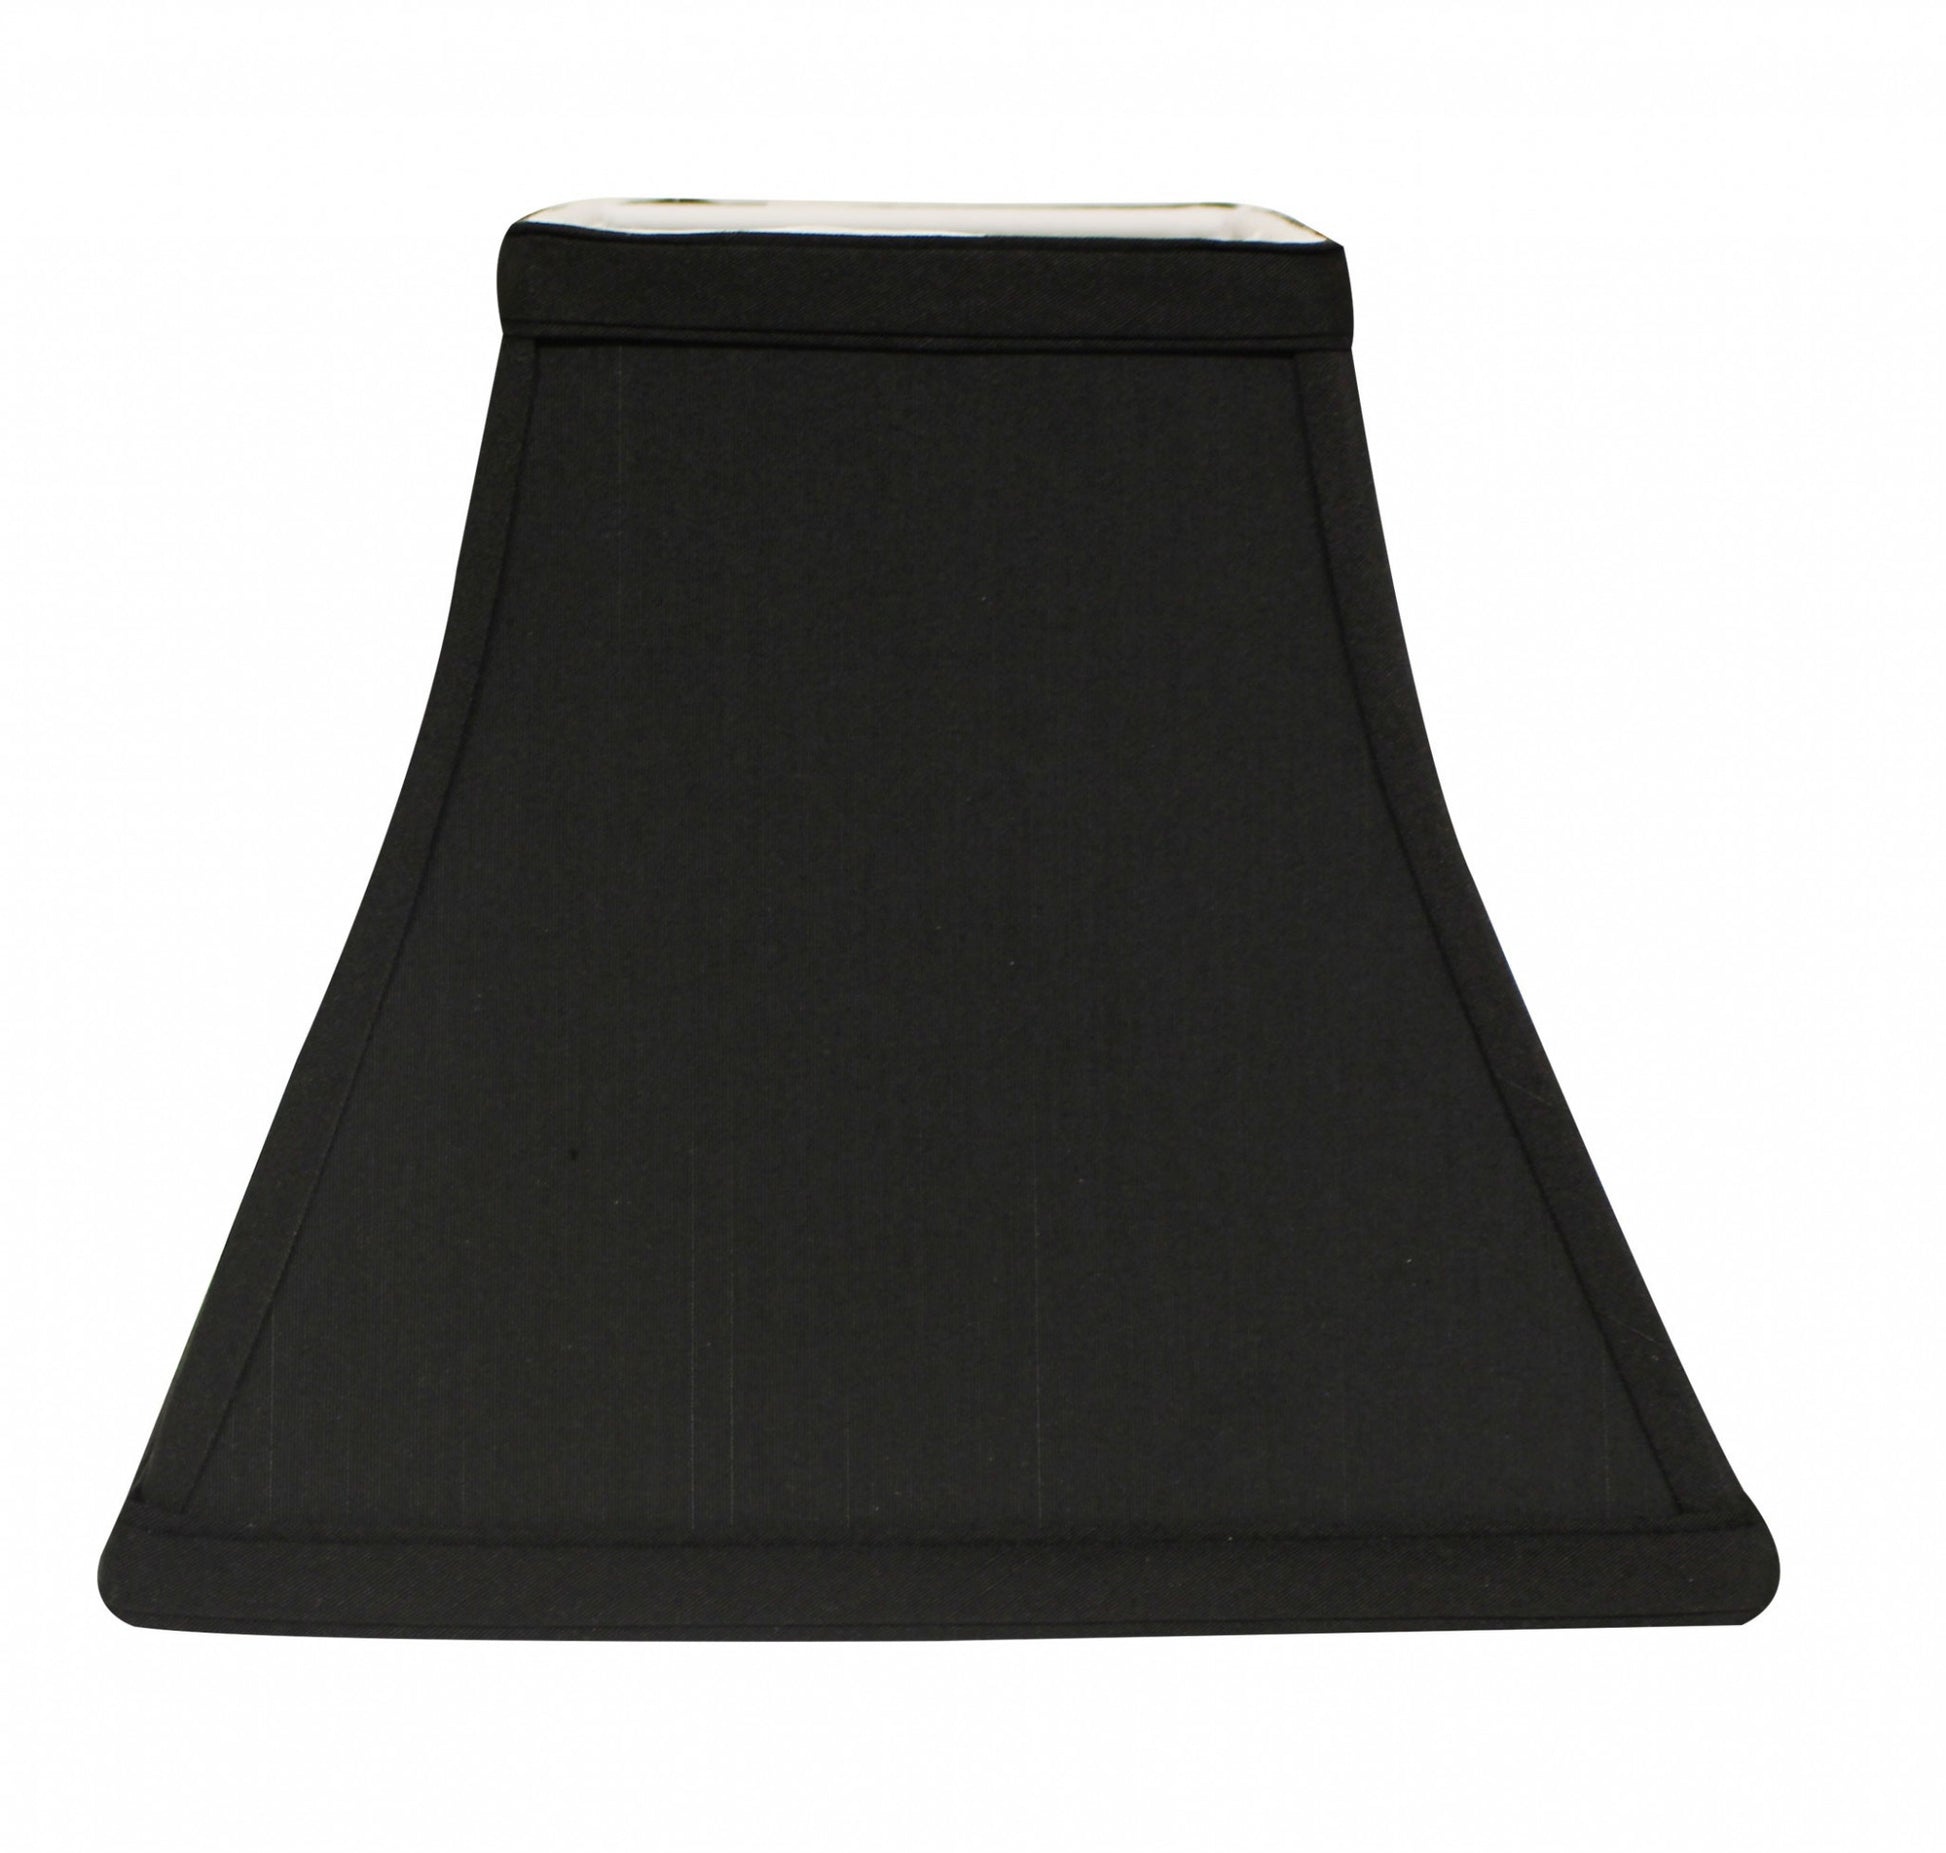 8" Black with White Lining Square Bell Shantung Lampshade-0